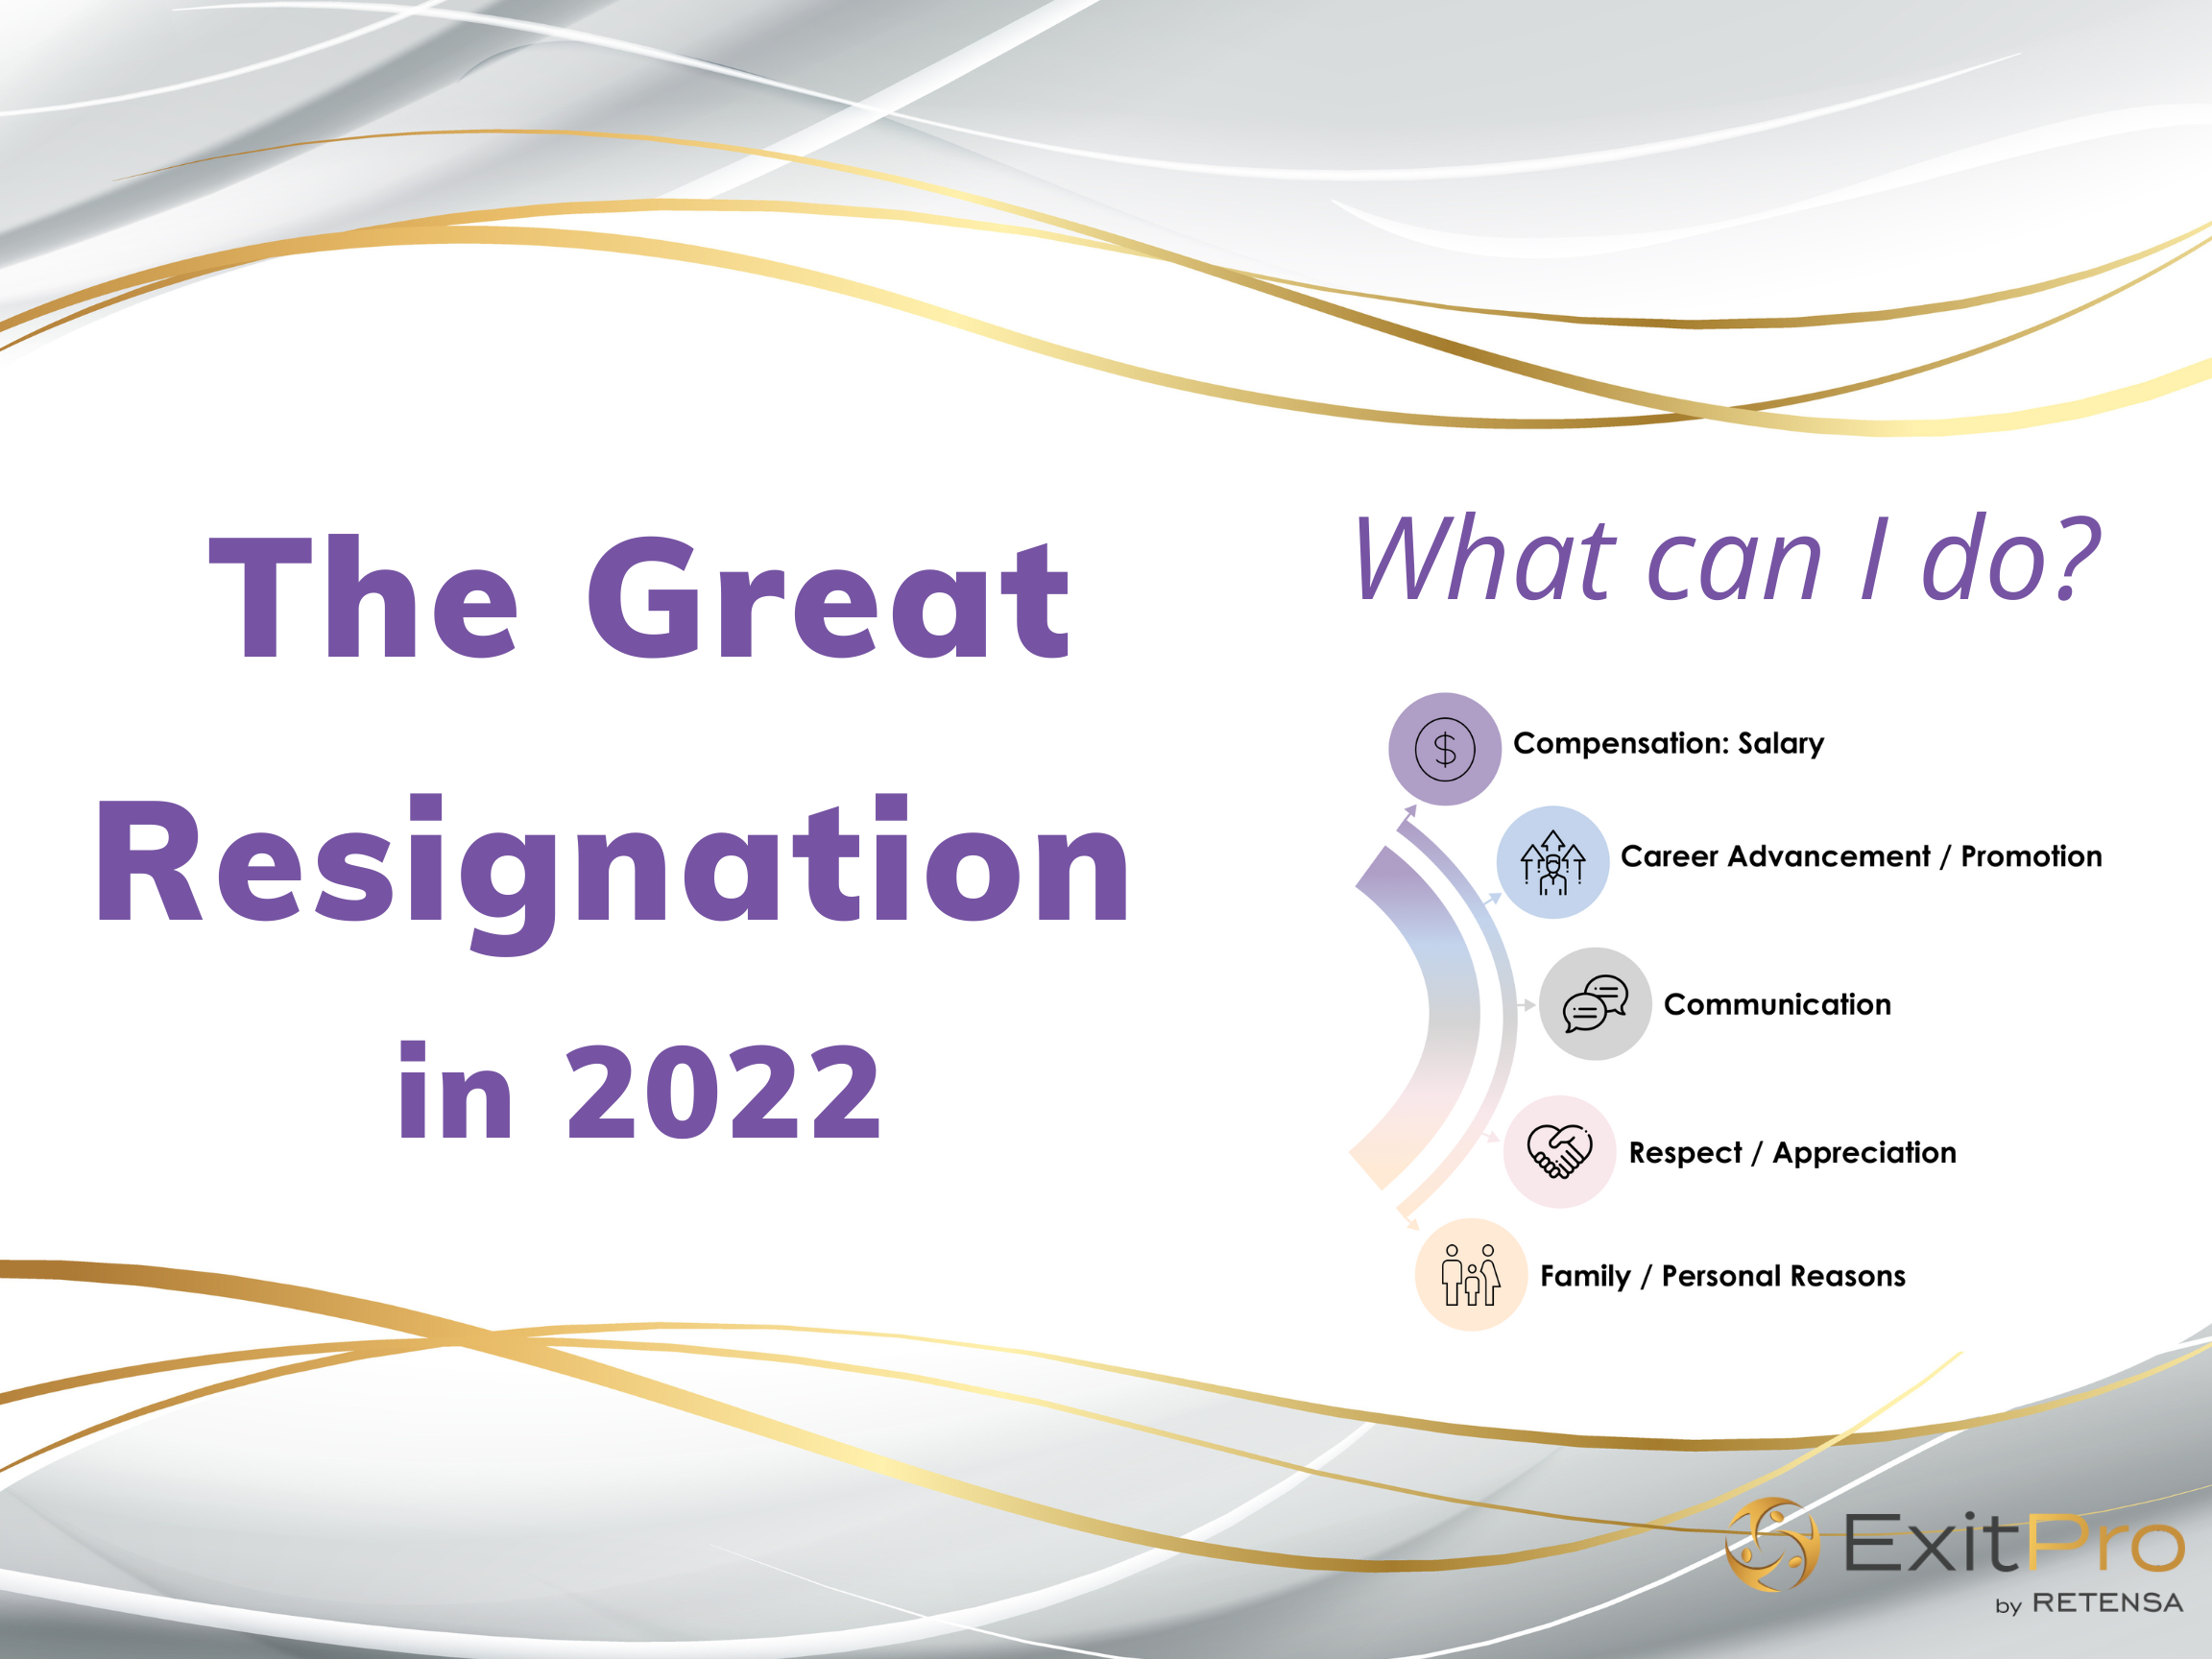 Great Resignation Infographic Part 3: “What can I do?”